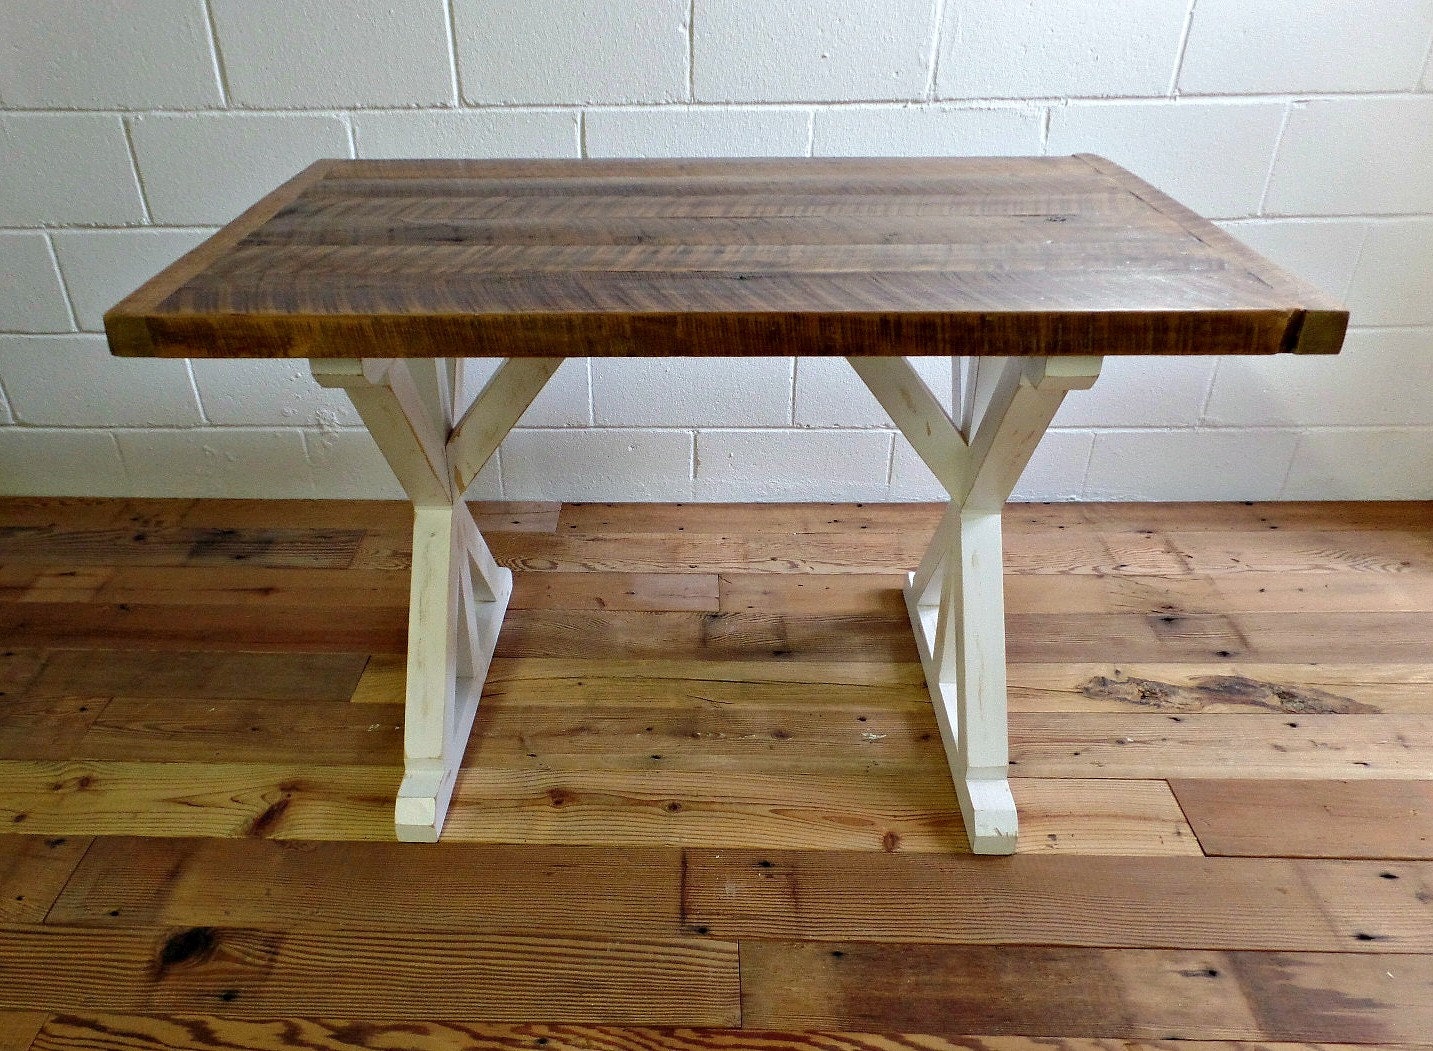 30 x 48 inch kitchen table